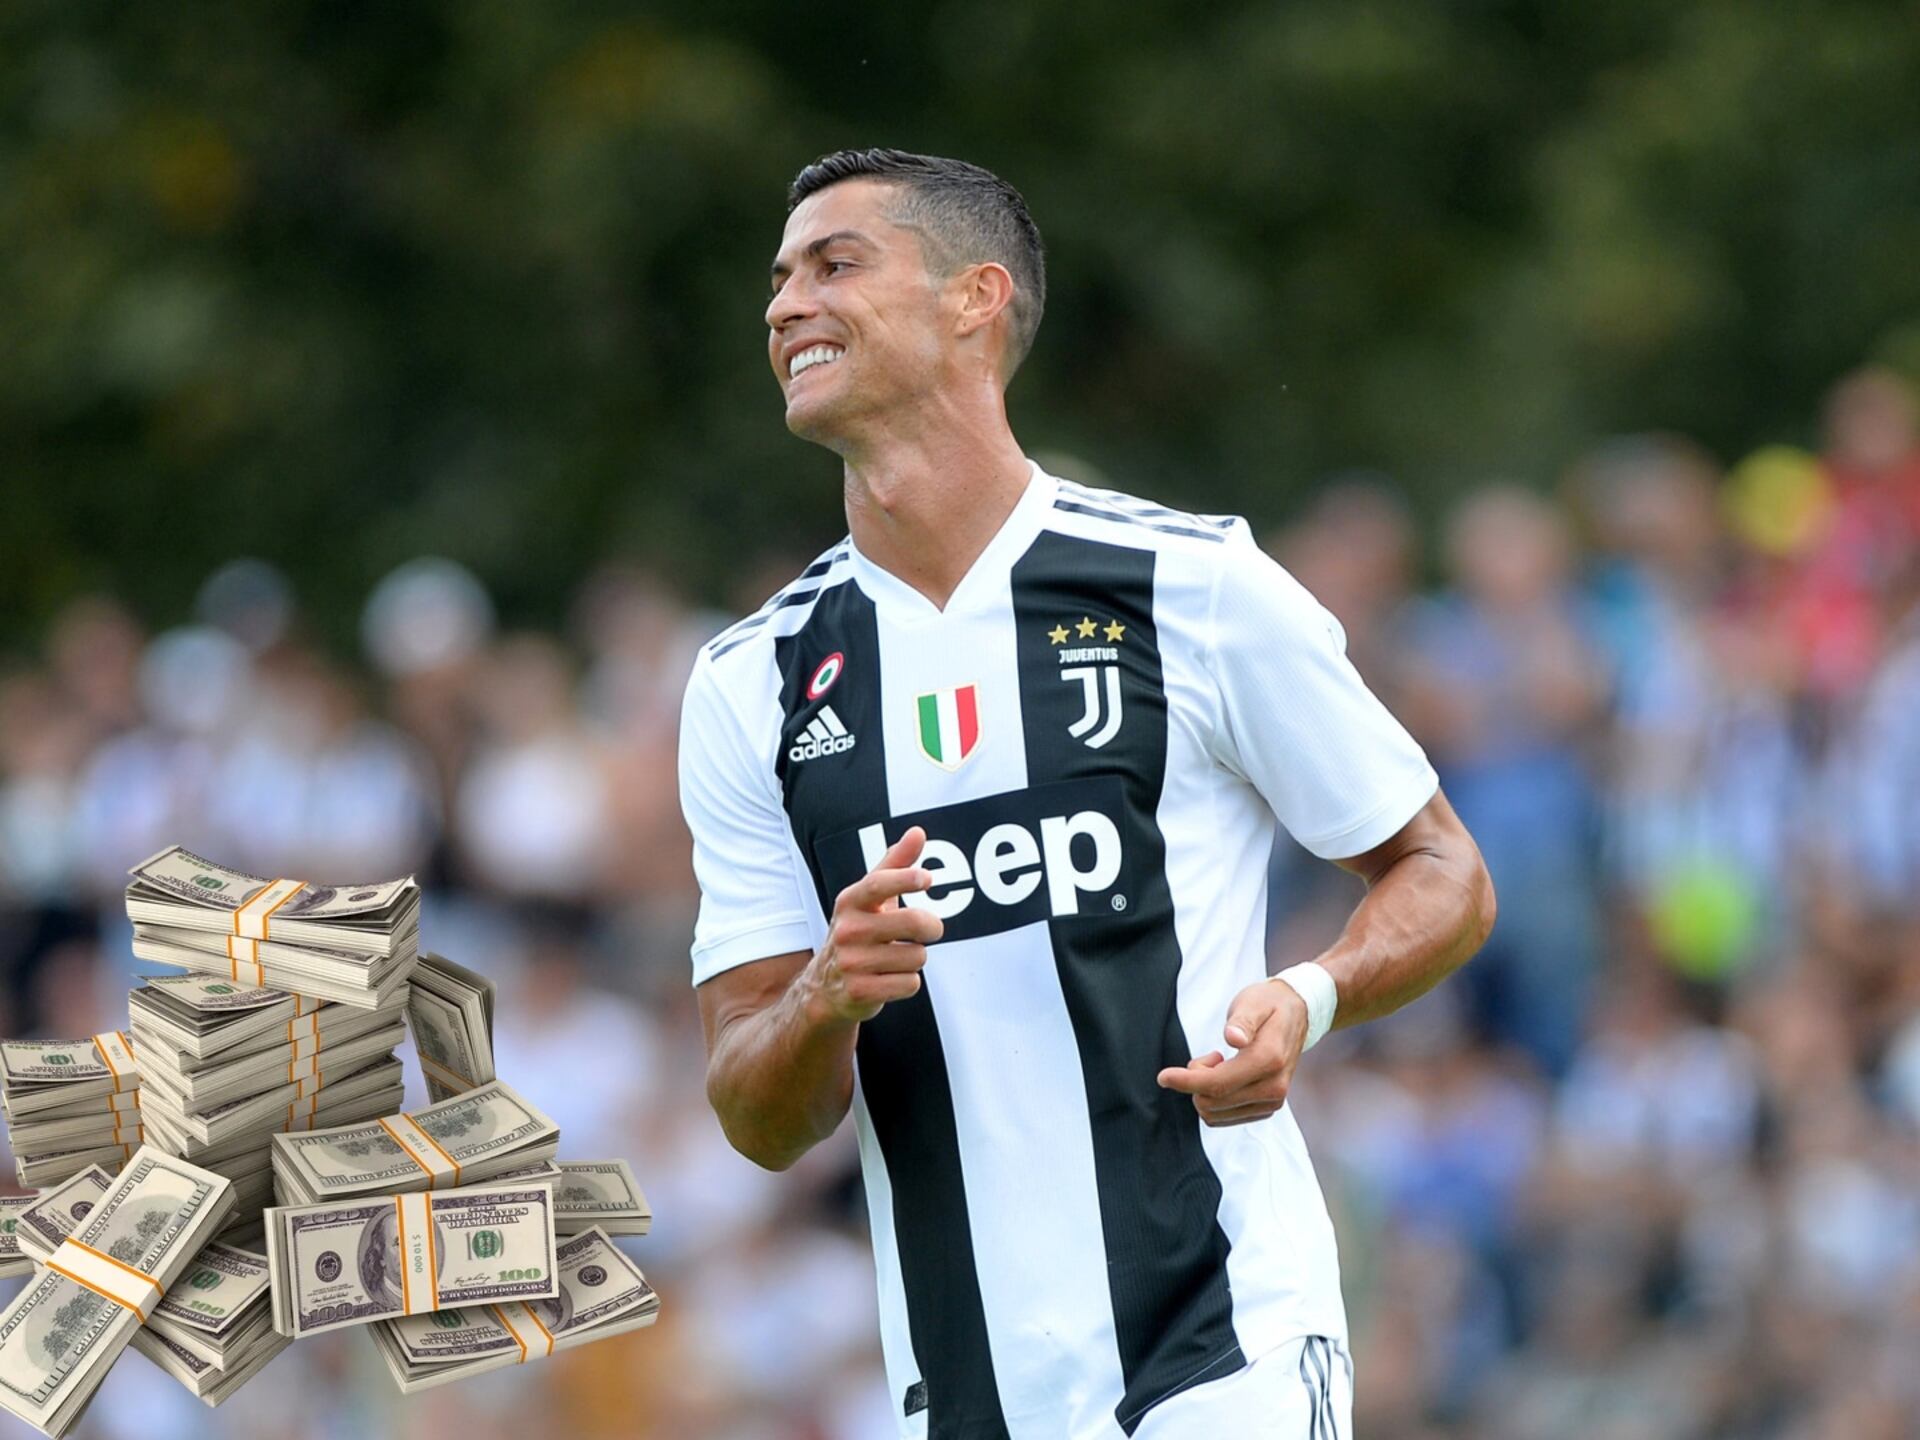 Cristiano shone at Juventus, he sued them and the millionaire amount Ronaldo is going to receive